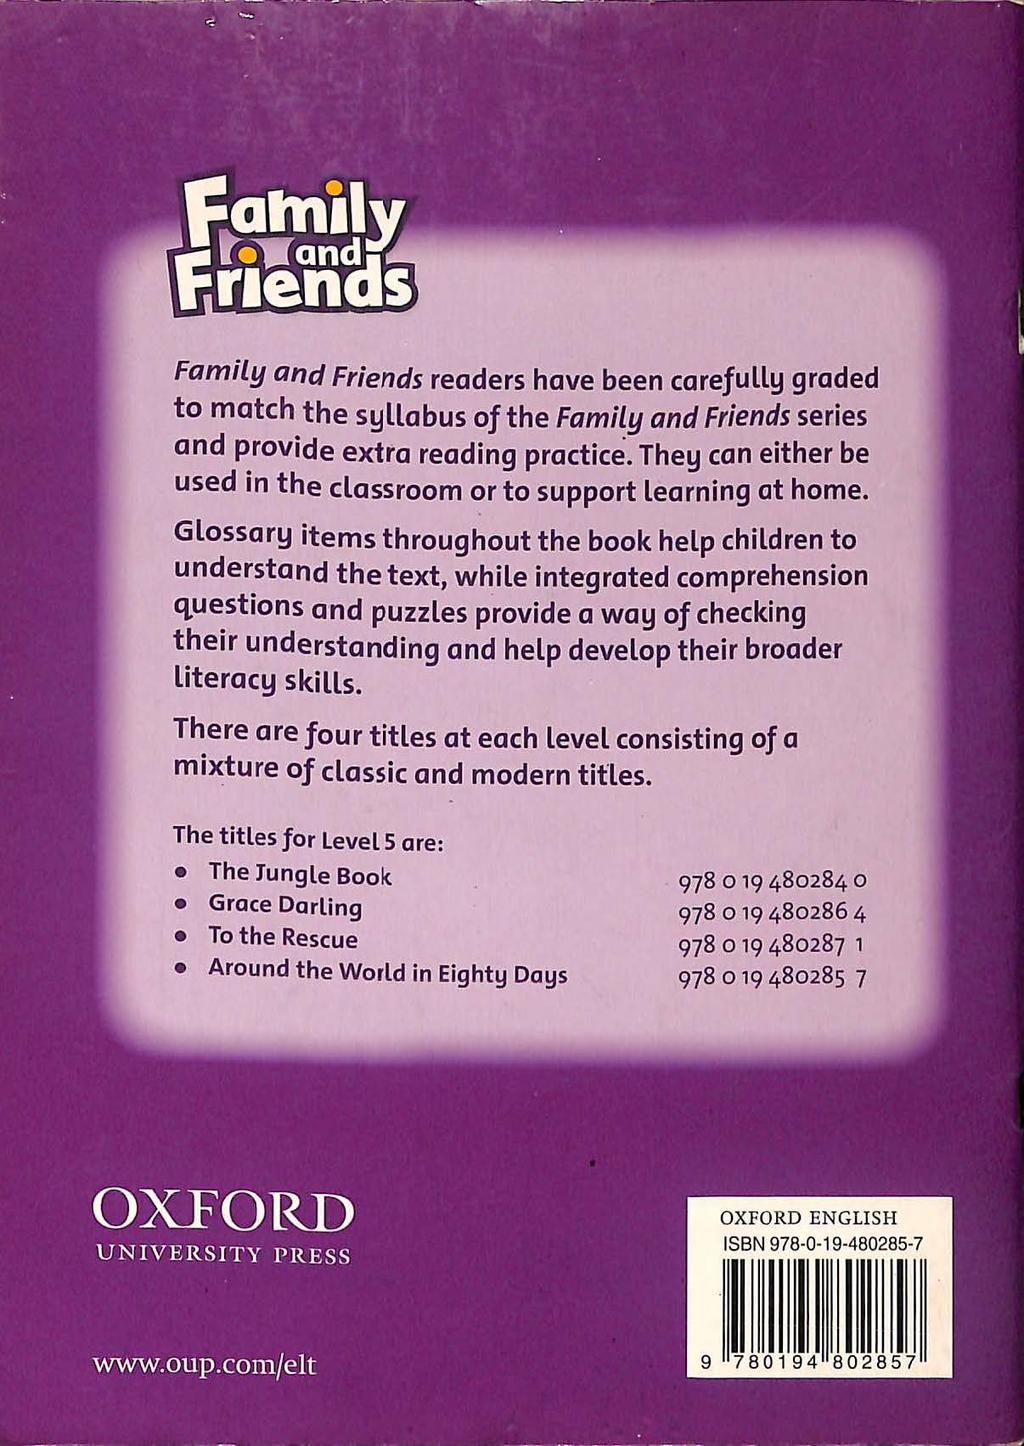 Family and Friends readers have been carefully graded to match the syllabus of the Family and Friends series and provide extra reading practice.